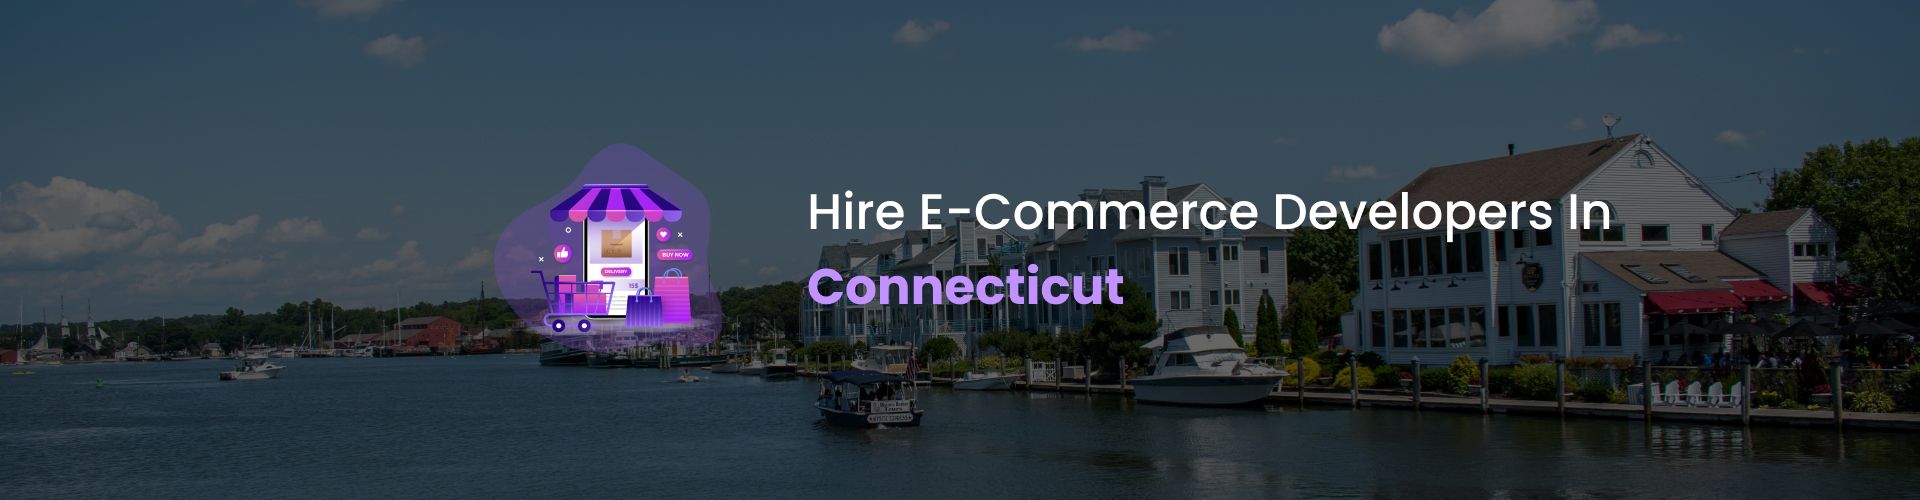 hire ecommerce developers in connecticut